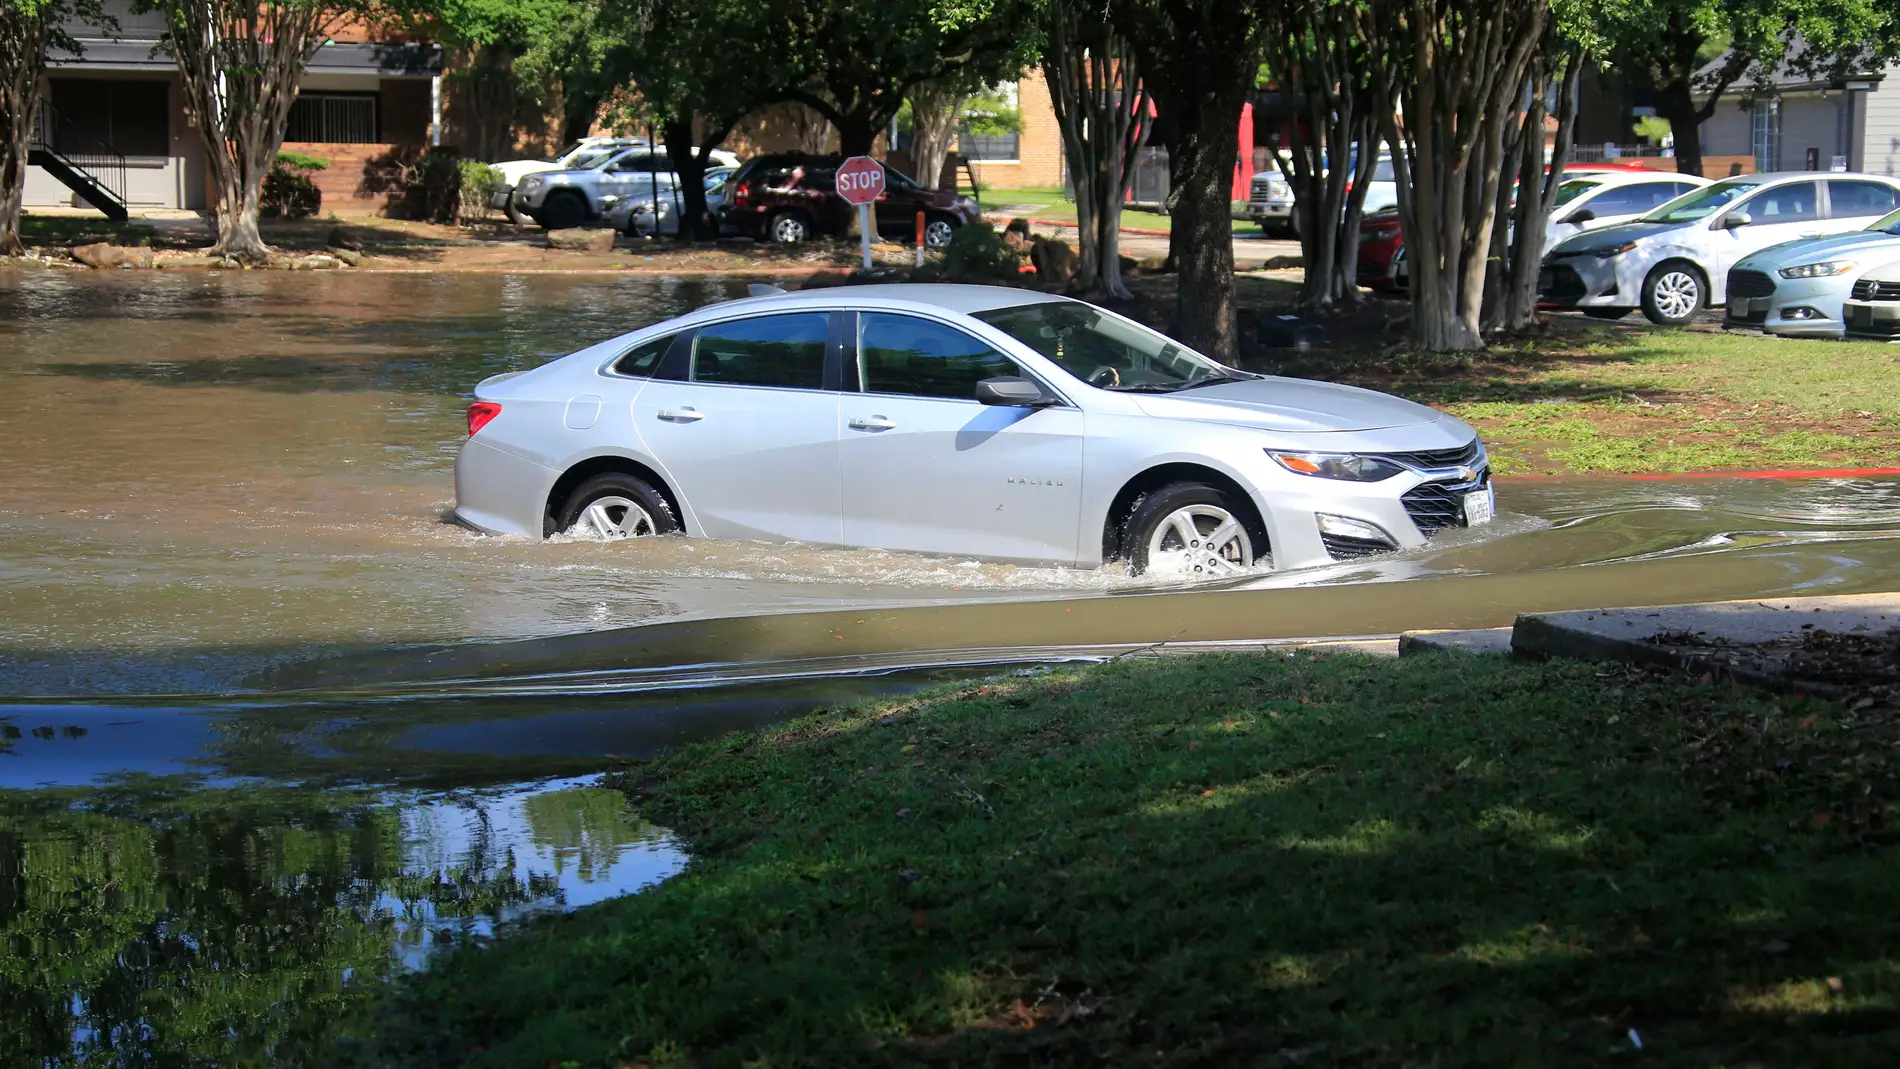 TEXAS, May 3, 2024 -- A car is seen in floodwaters in a residential area in Spring, Texas, the United States, May 2, 2024. Multiple rounds of thunderstorms are worsening flooding threats on Thursday across eastern Texas, including the Houston area, forcing evacuations and school closures. 02/05/2024